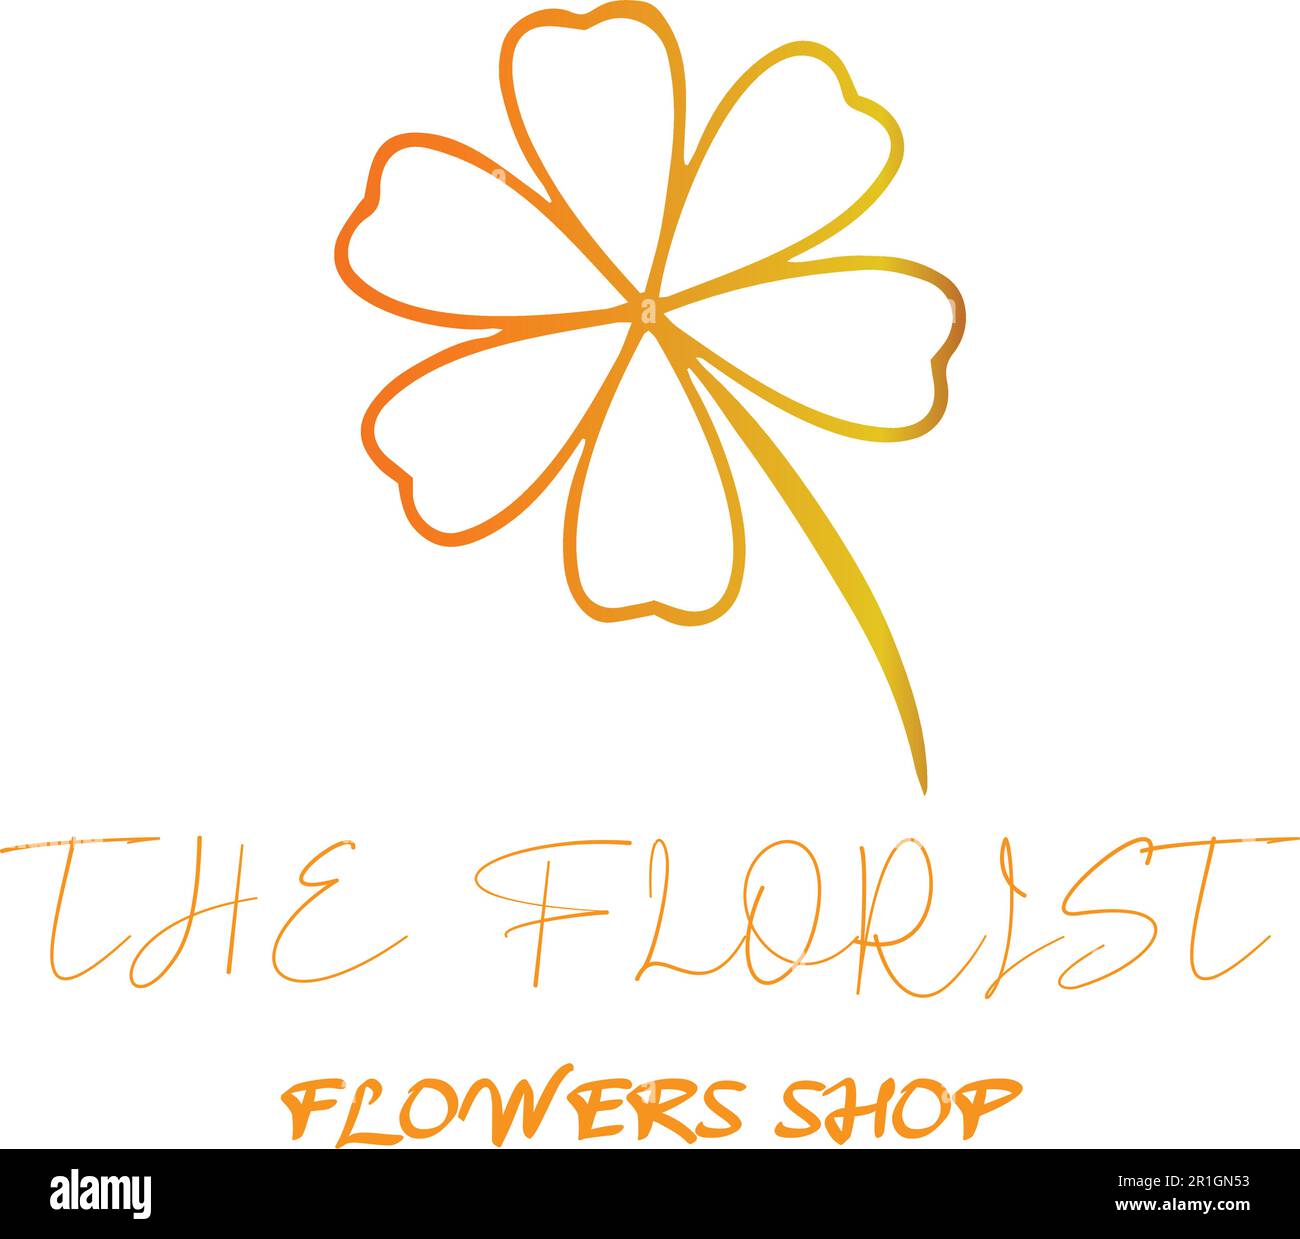 The Florist Flowers Shop Logo Template Vector File is a modern and elegant design perfect for any flower shop or florist business. The logo features a Stock Vector